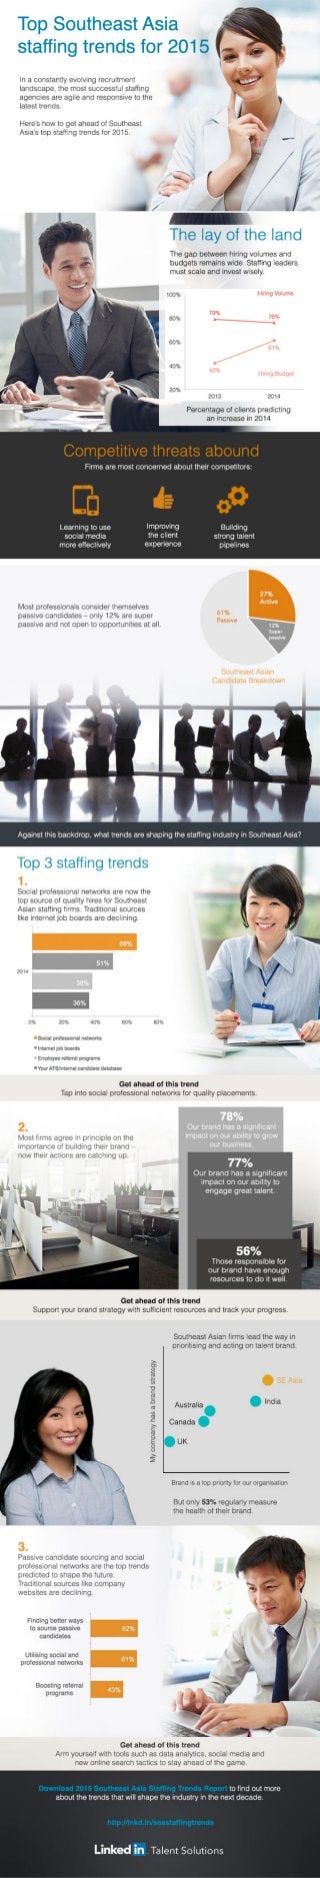 Top Southeast Asia Staffing Trends for 2015 | Infographic